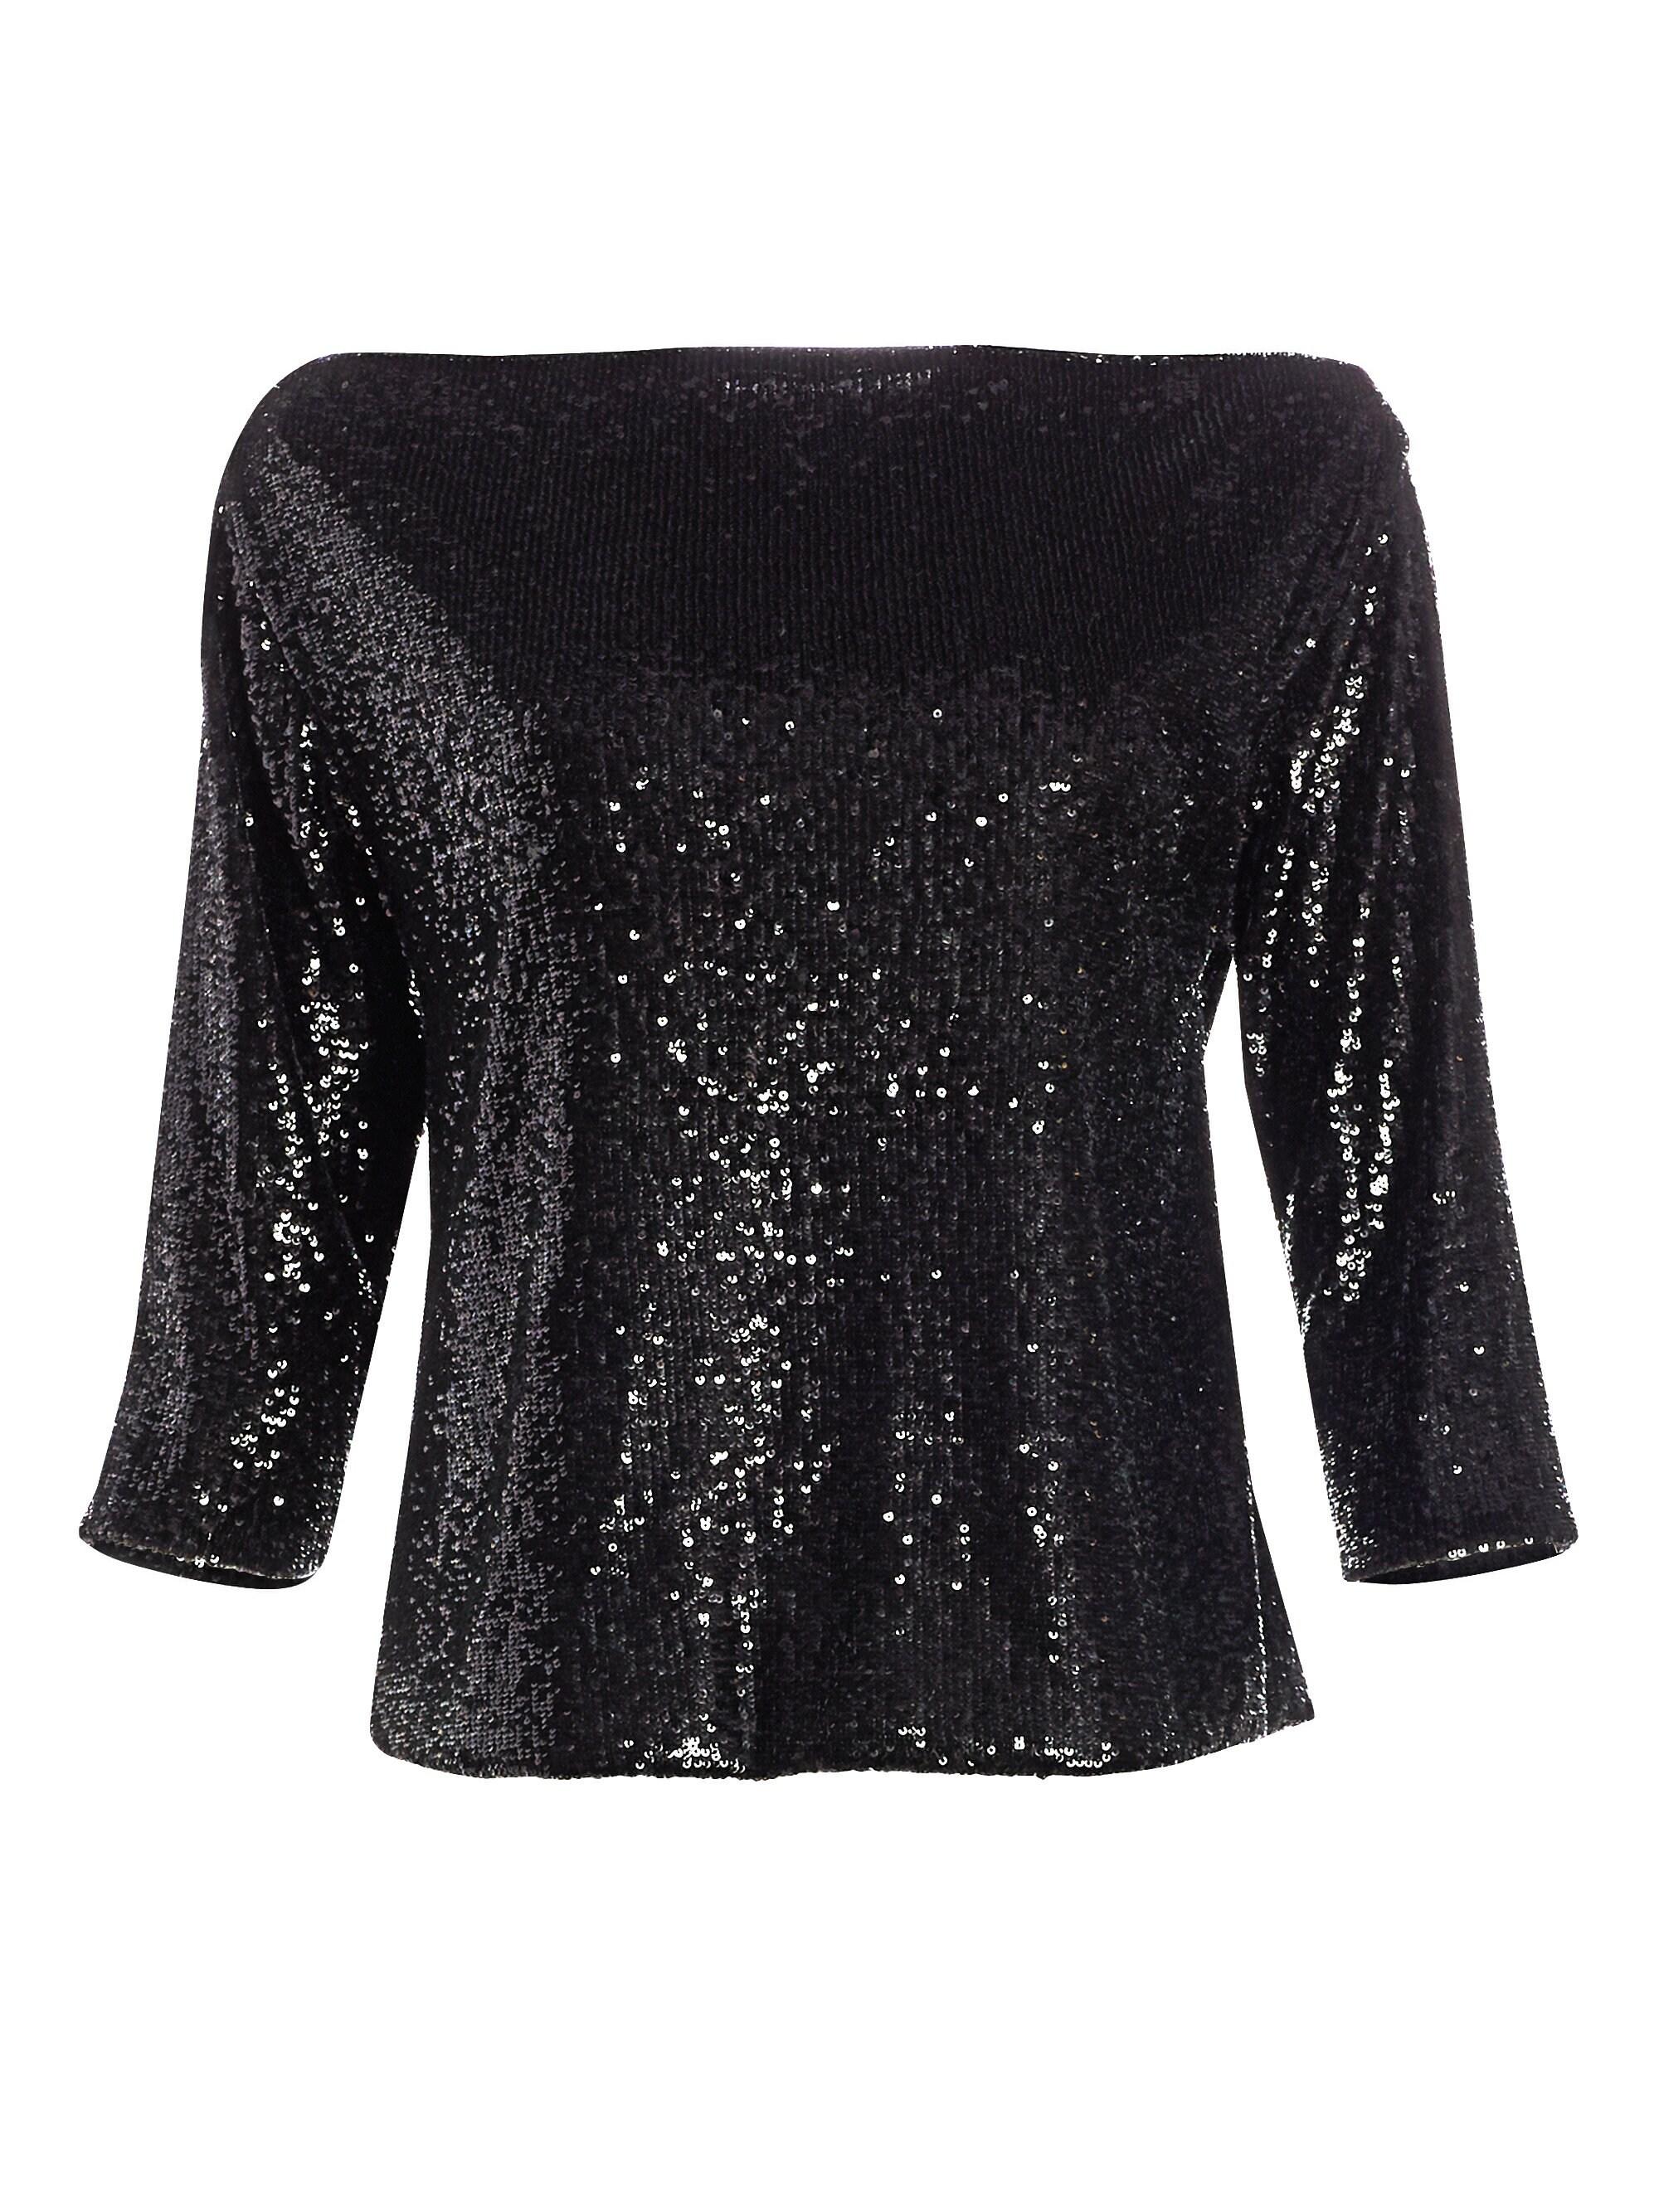 A.L.C. Zoey Off-shoulder Sequin 3/4-sleeve Top in Black - Lyst